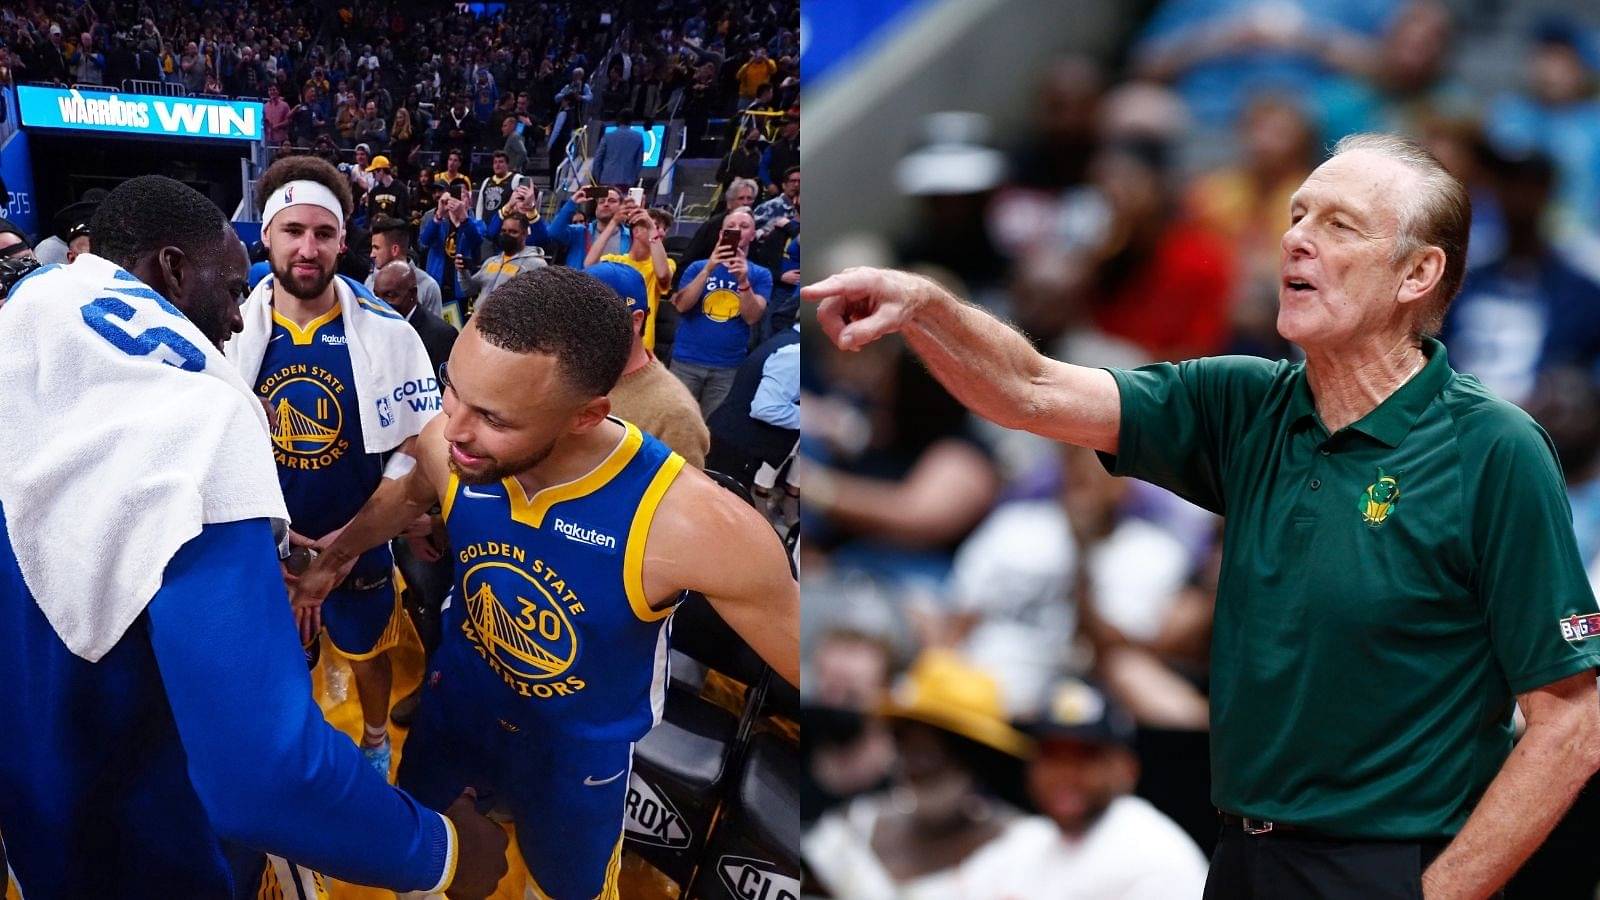 "Golden State Warriors are not a championship-caliber basketball team right now": Rick Barry keeps it straight for his former team, says they need to add more to the good nucleus